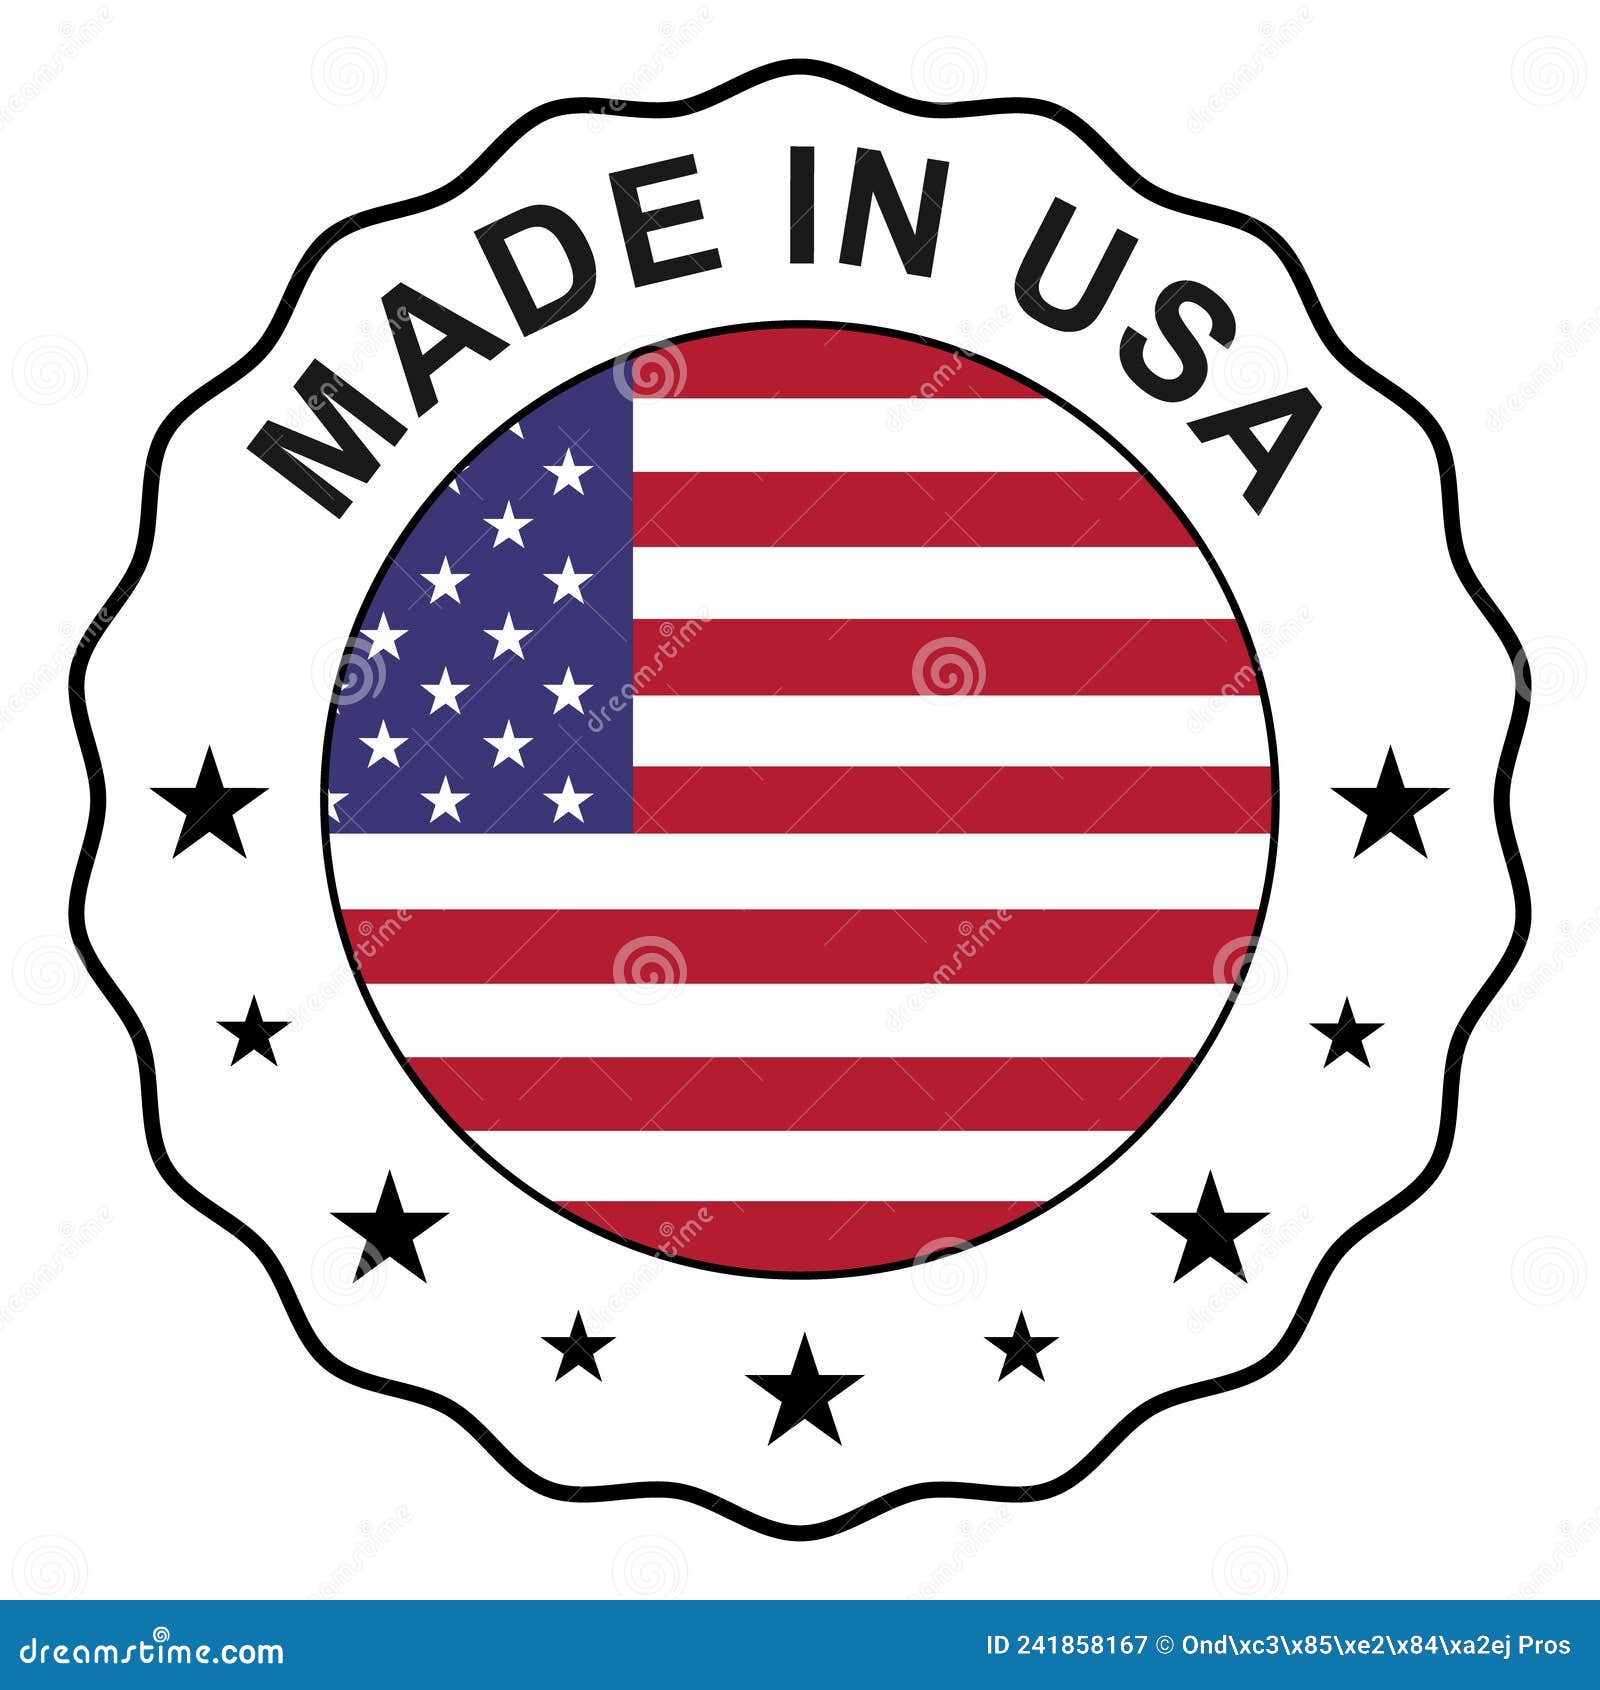 Made in USA Seal, Product Tag Label Sign, Sticker Quality Stamp Vector ...